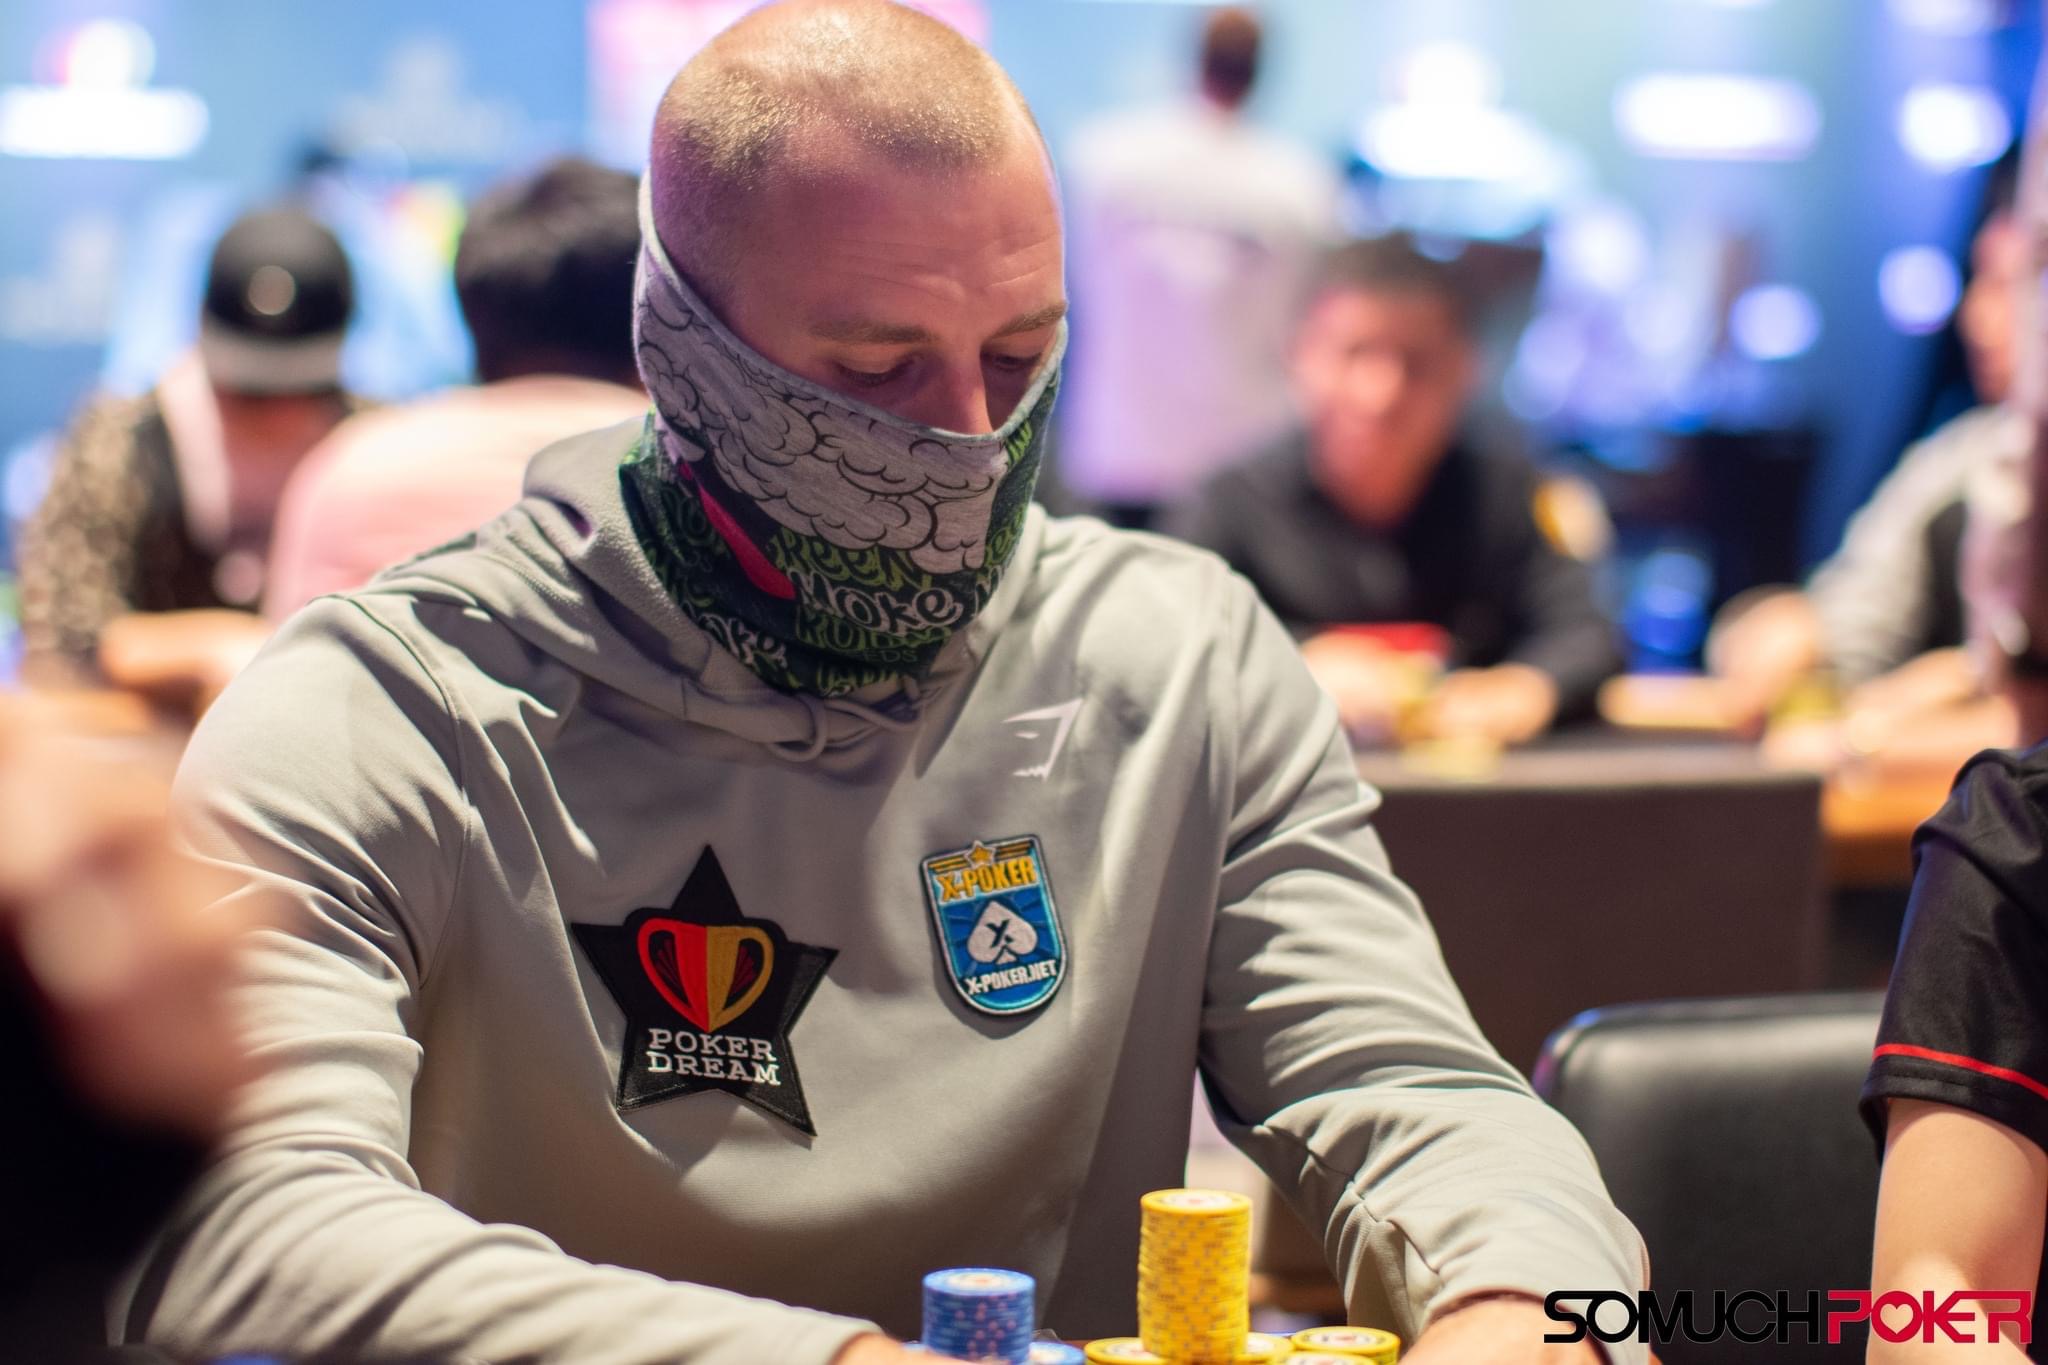 World Poker Championship Main Event draws 651 entries for over ₫14.2 Billion prize pool; Grant Gardner bags overall lead; 82 advance to Day 2